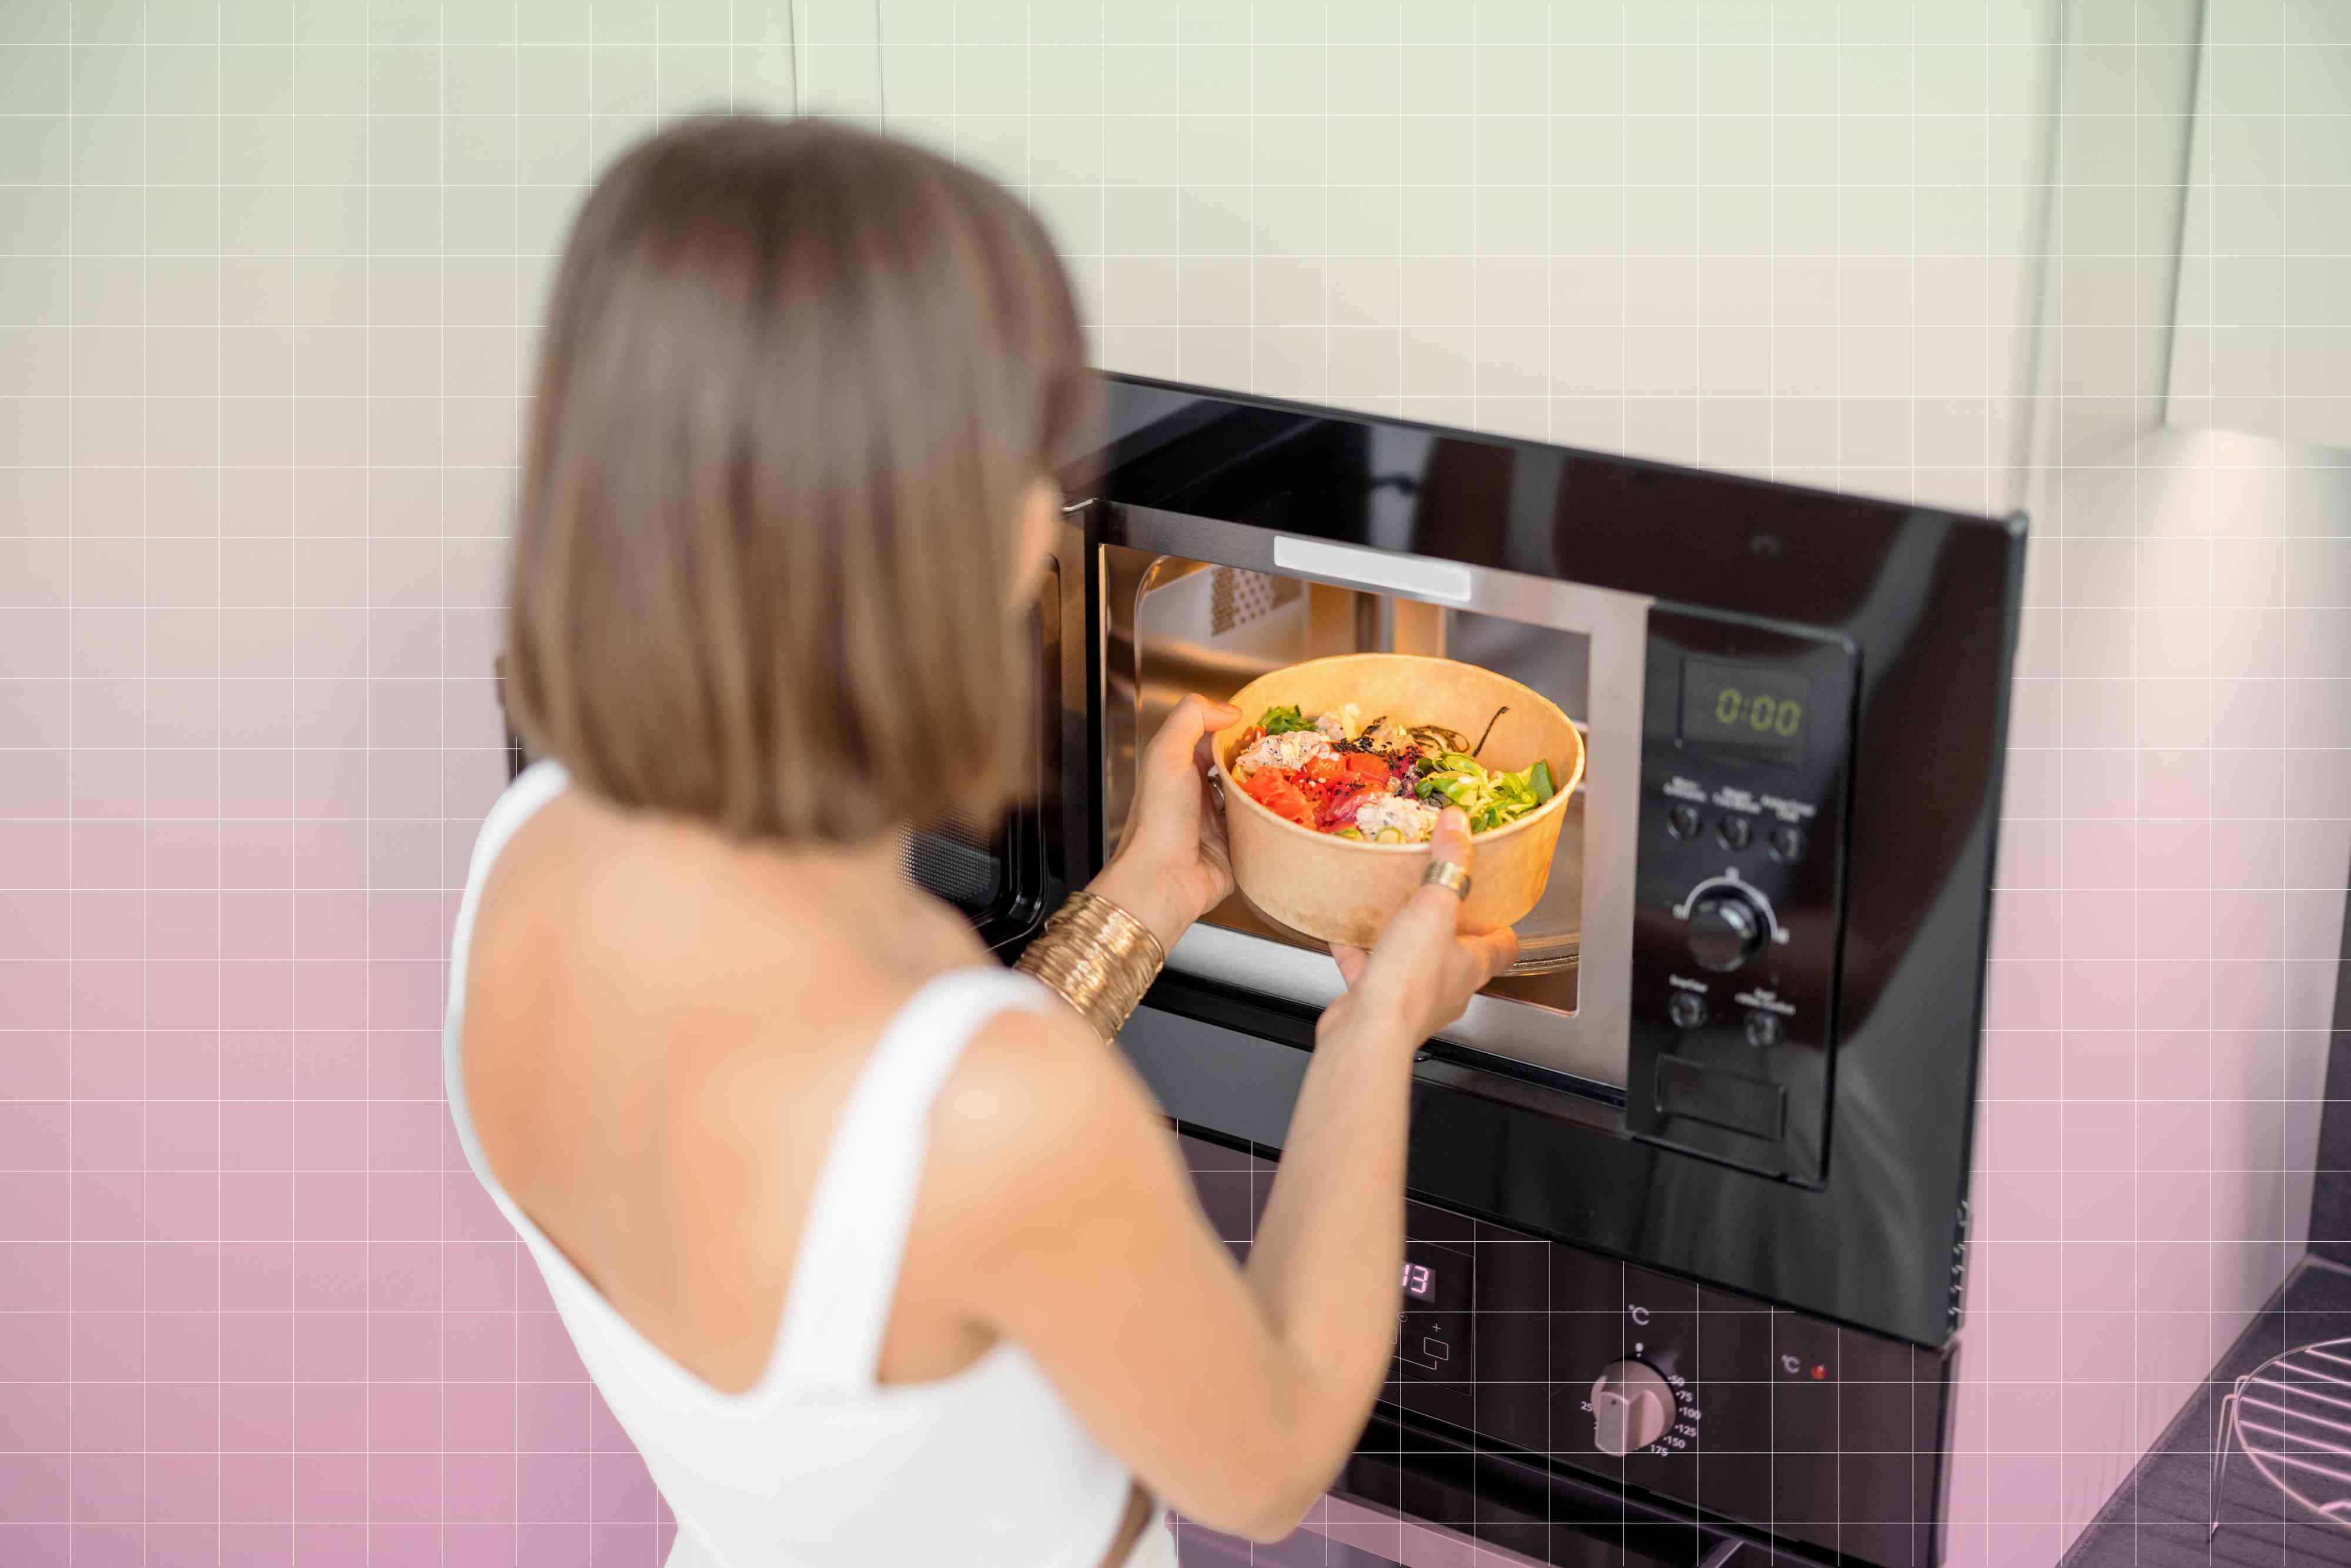 does microwaving your food destroy its nutrients? here's what dietitians say